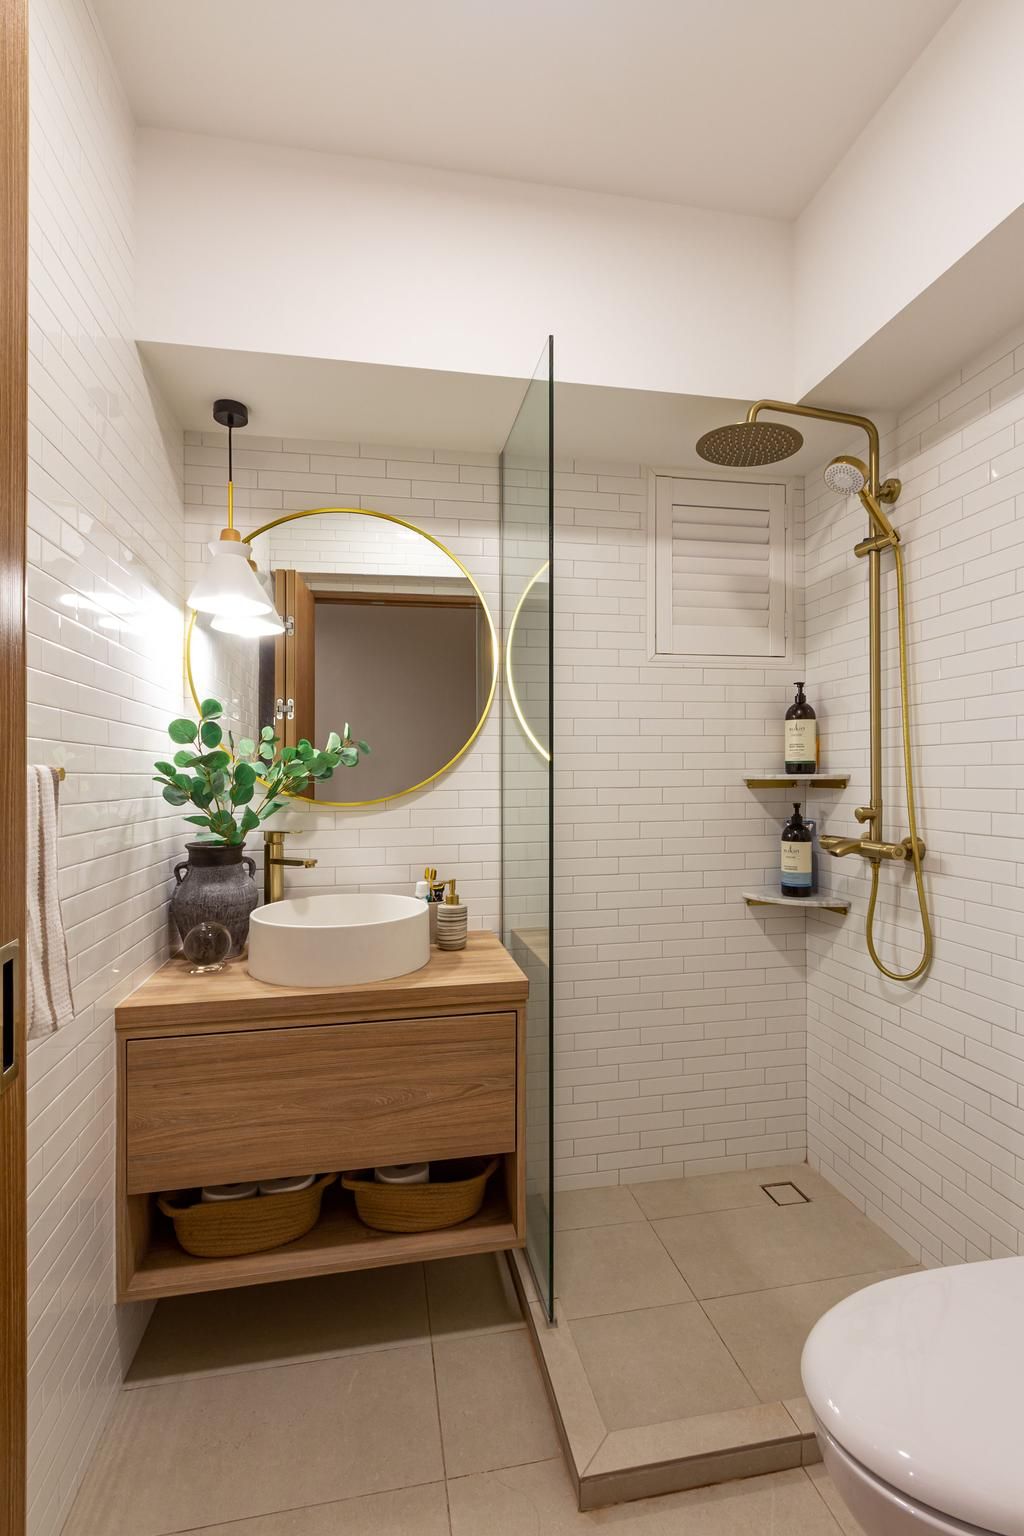 Creating Your Dream Bathroom Toilet: Design and Functionality Combined